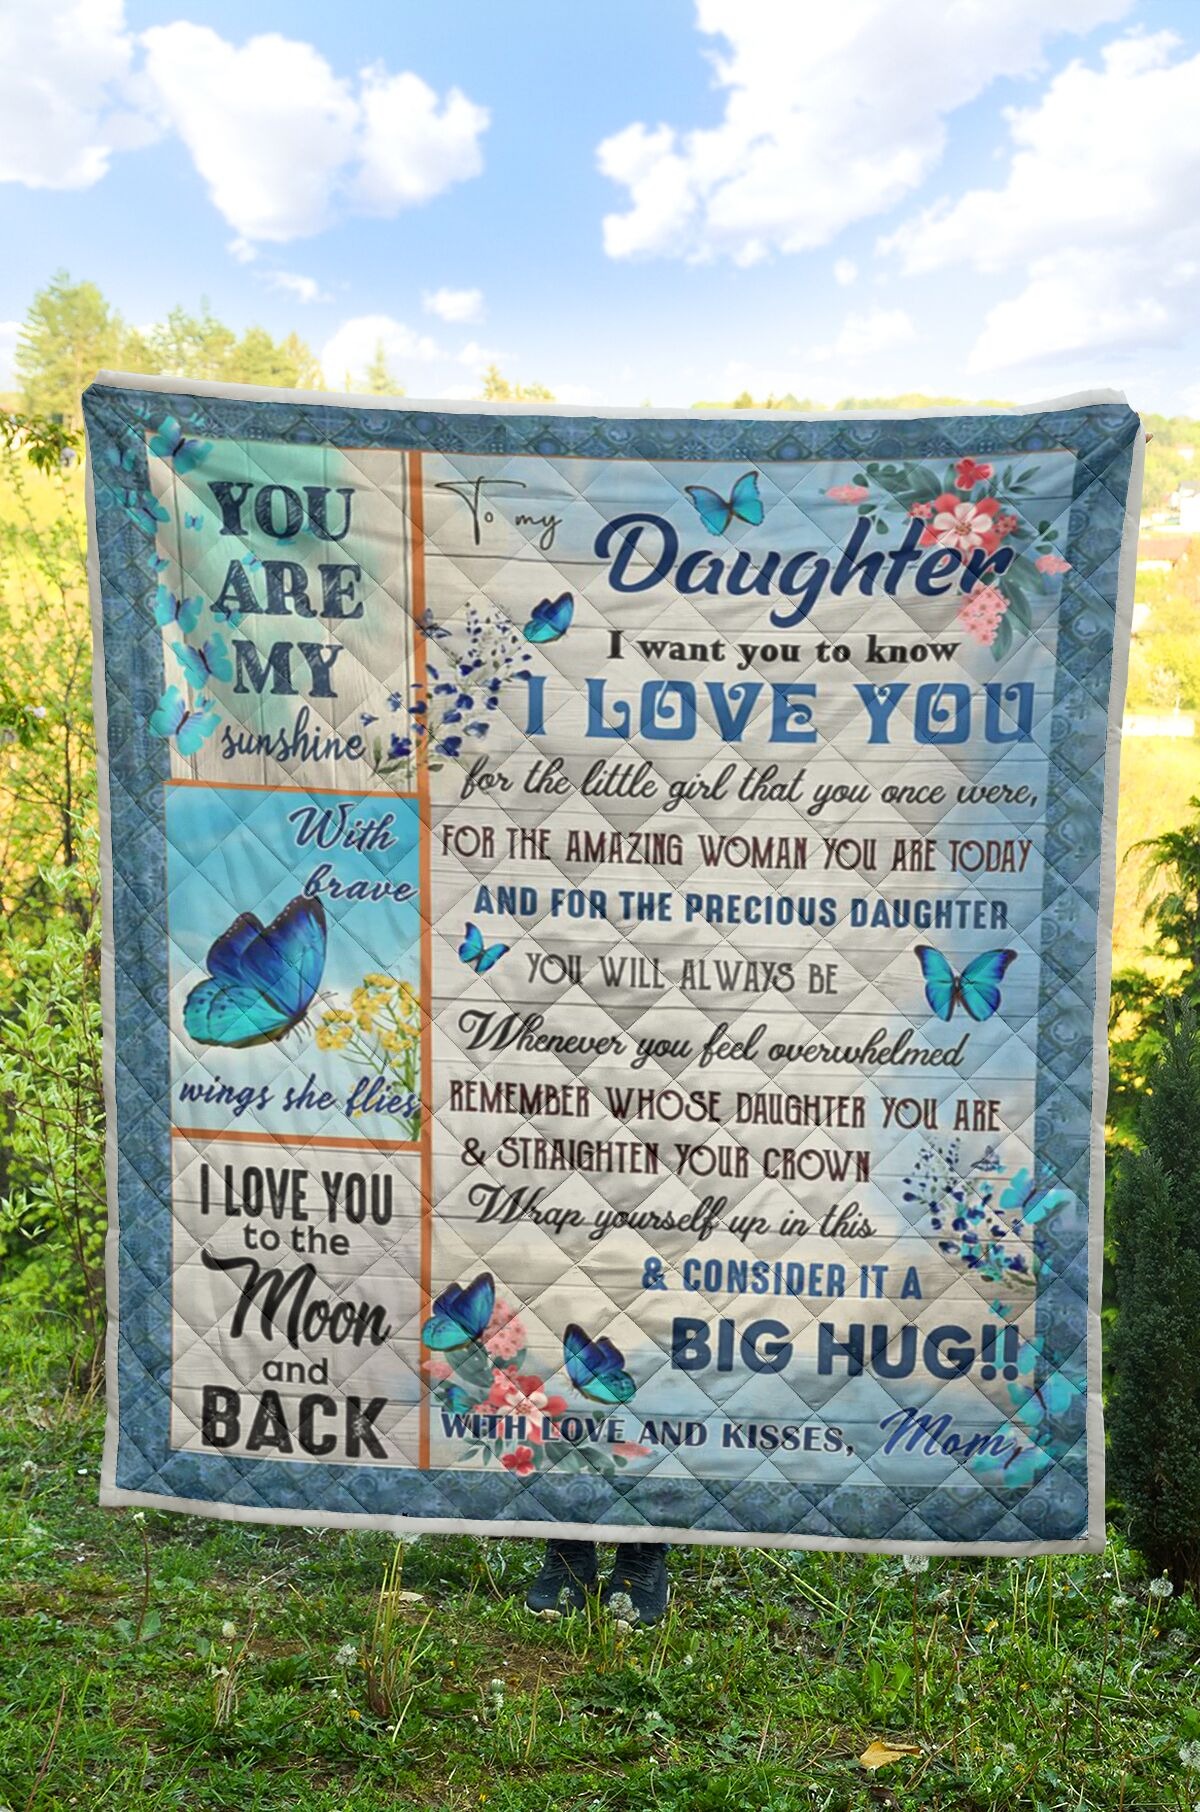 To my DaughterI want you to know I love you QUILT3